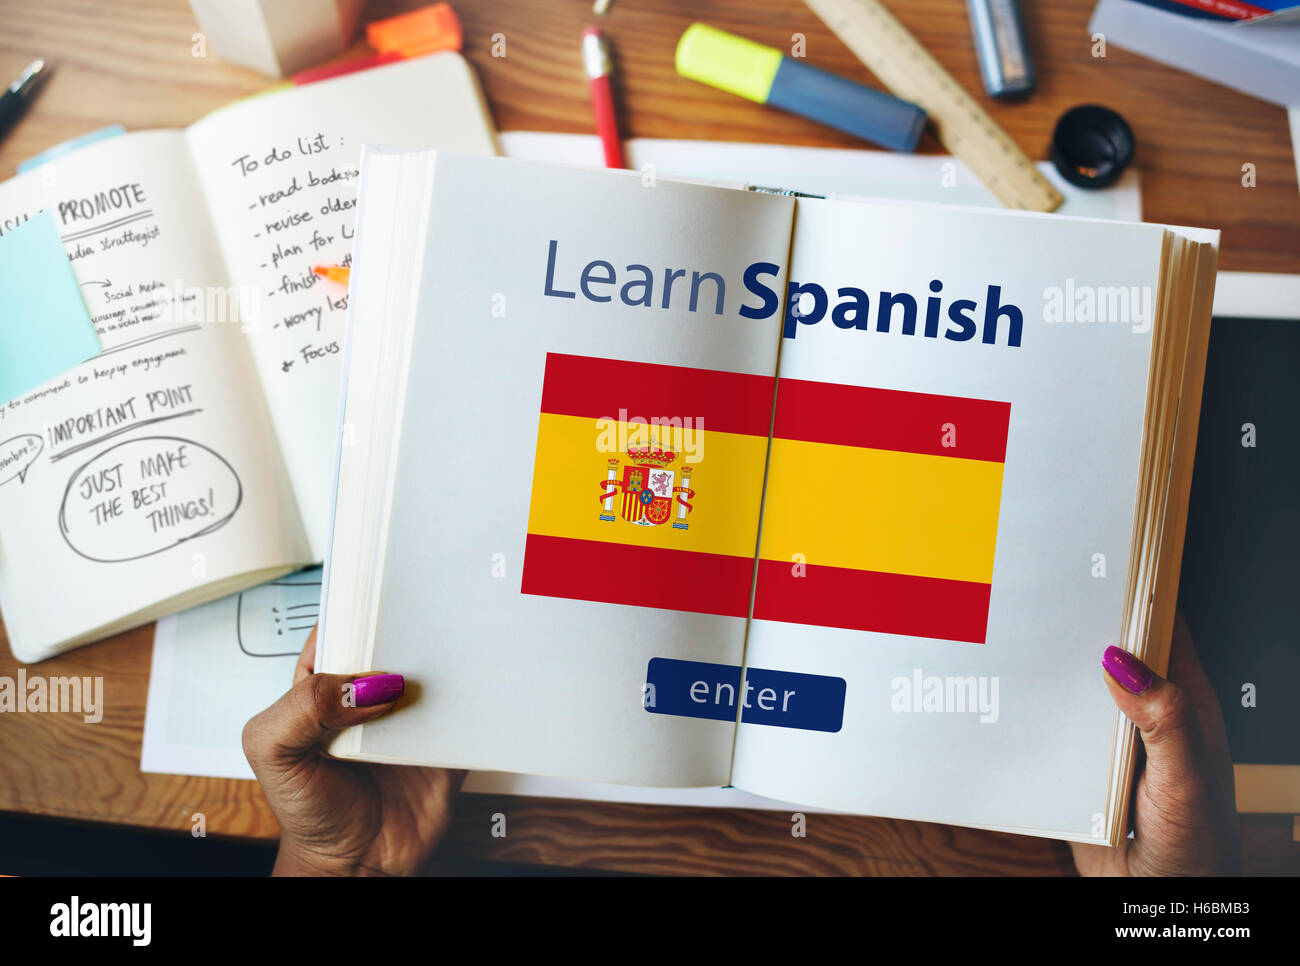 Learn Spanish Language Online Education Concept Stock Photo